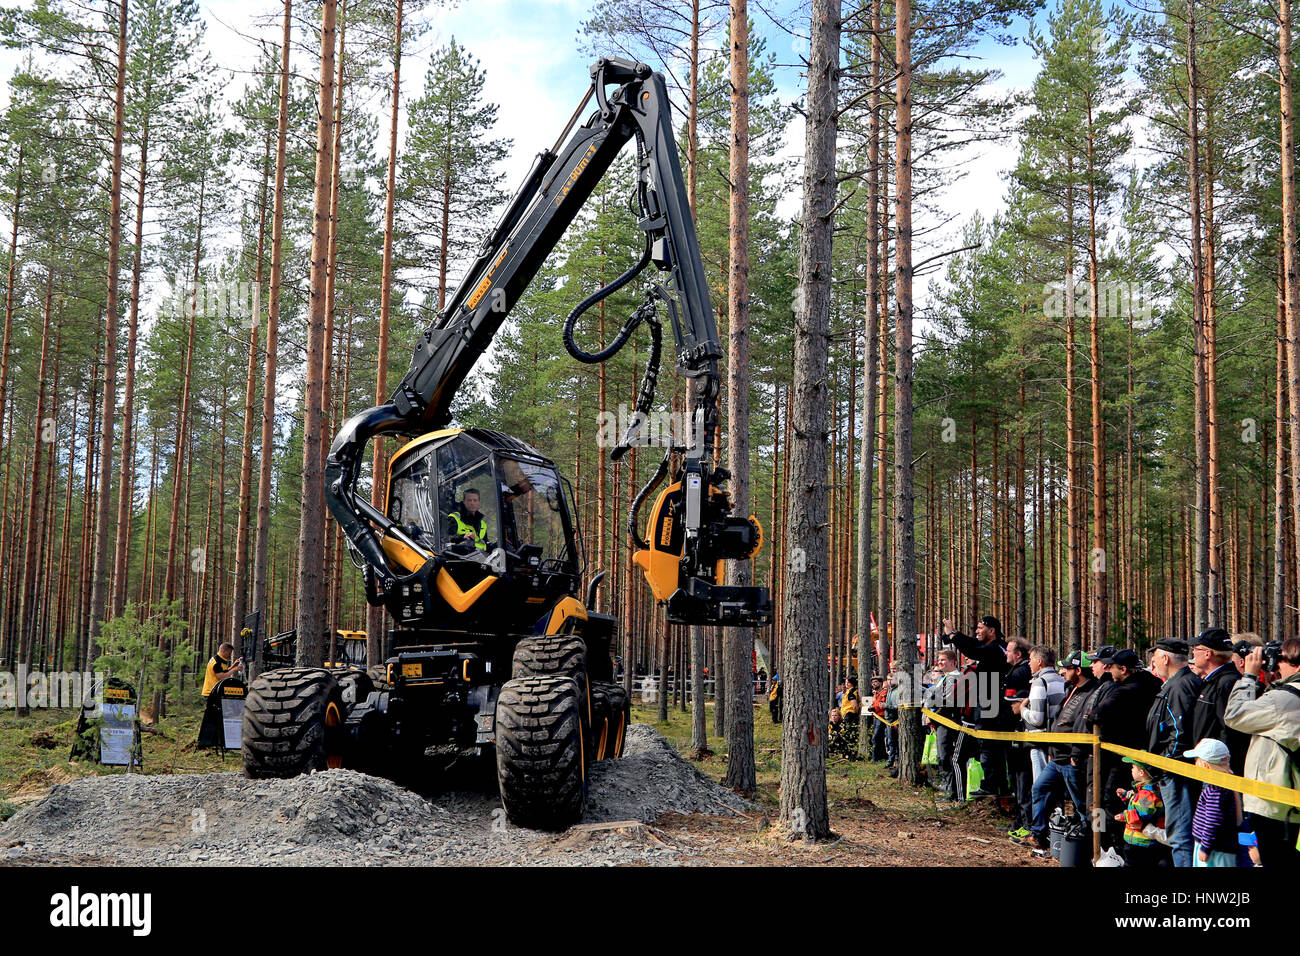 JAMSA, FINLAND - SEPTEMBER 2, 2016: Ponsse forest harvester operator shows the Scorpion King harvester head H7 to interested viewers in a work demonst Stock Photo